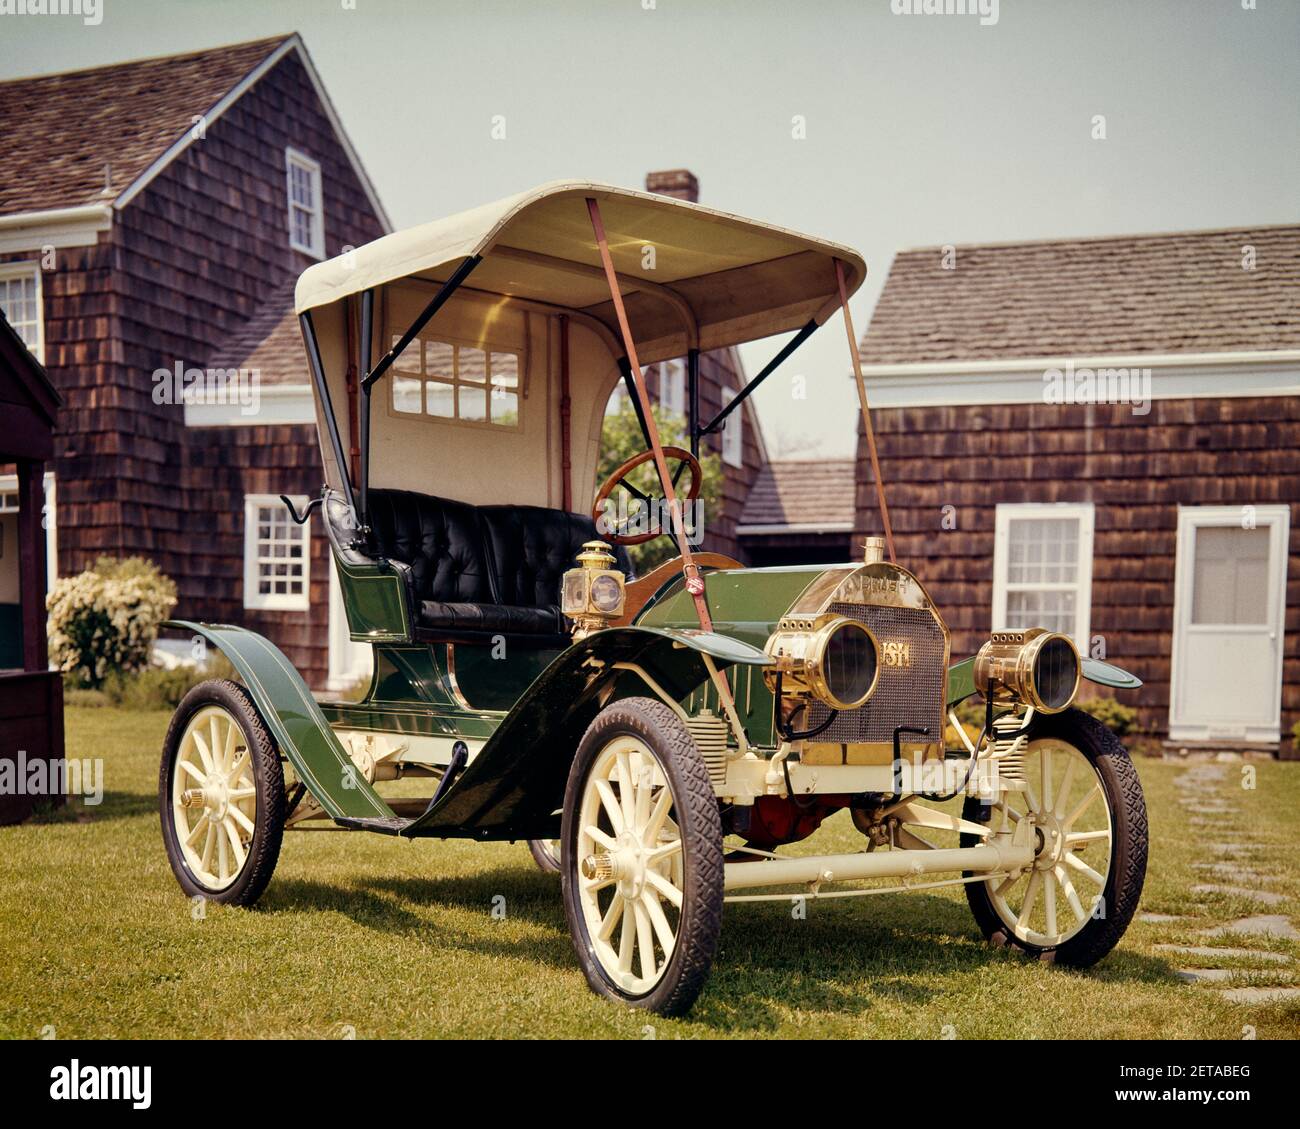 1900s ANTIQUE 1909 BUICK TWO SEAT CANVAS TOP WOOD SPOKE WHEEL BRASS HEADLAMPS AUTOMOBILE PAINTED GREEN AND CREAM - km2858 PHT001 HARS OLD FASHIONED Stock Photo